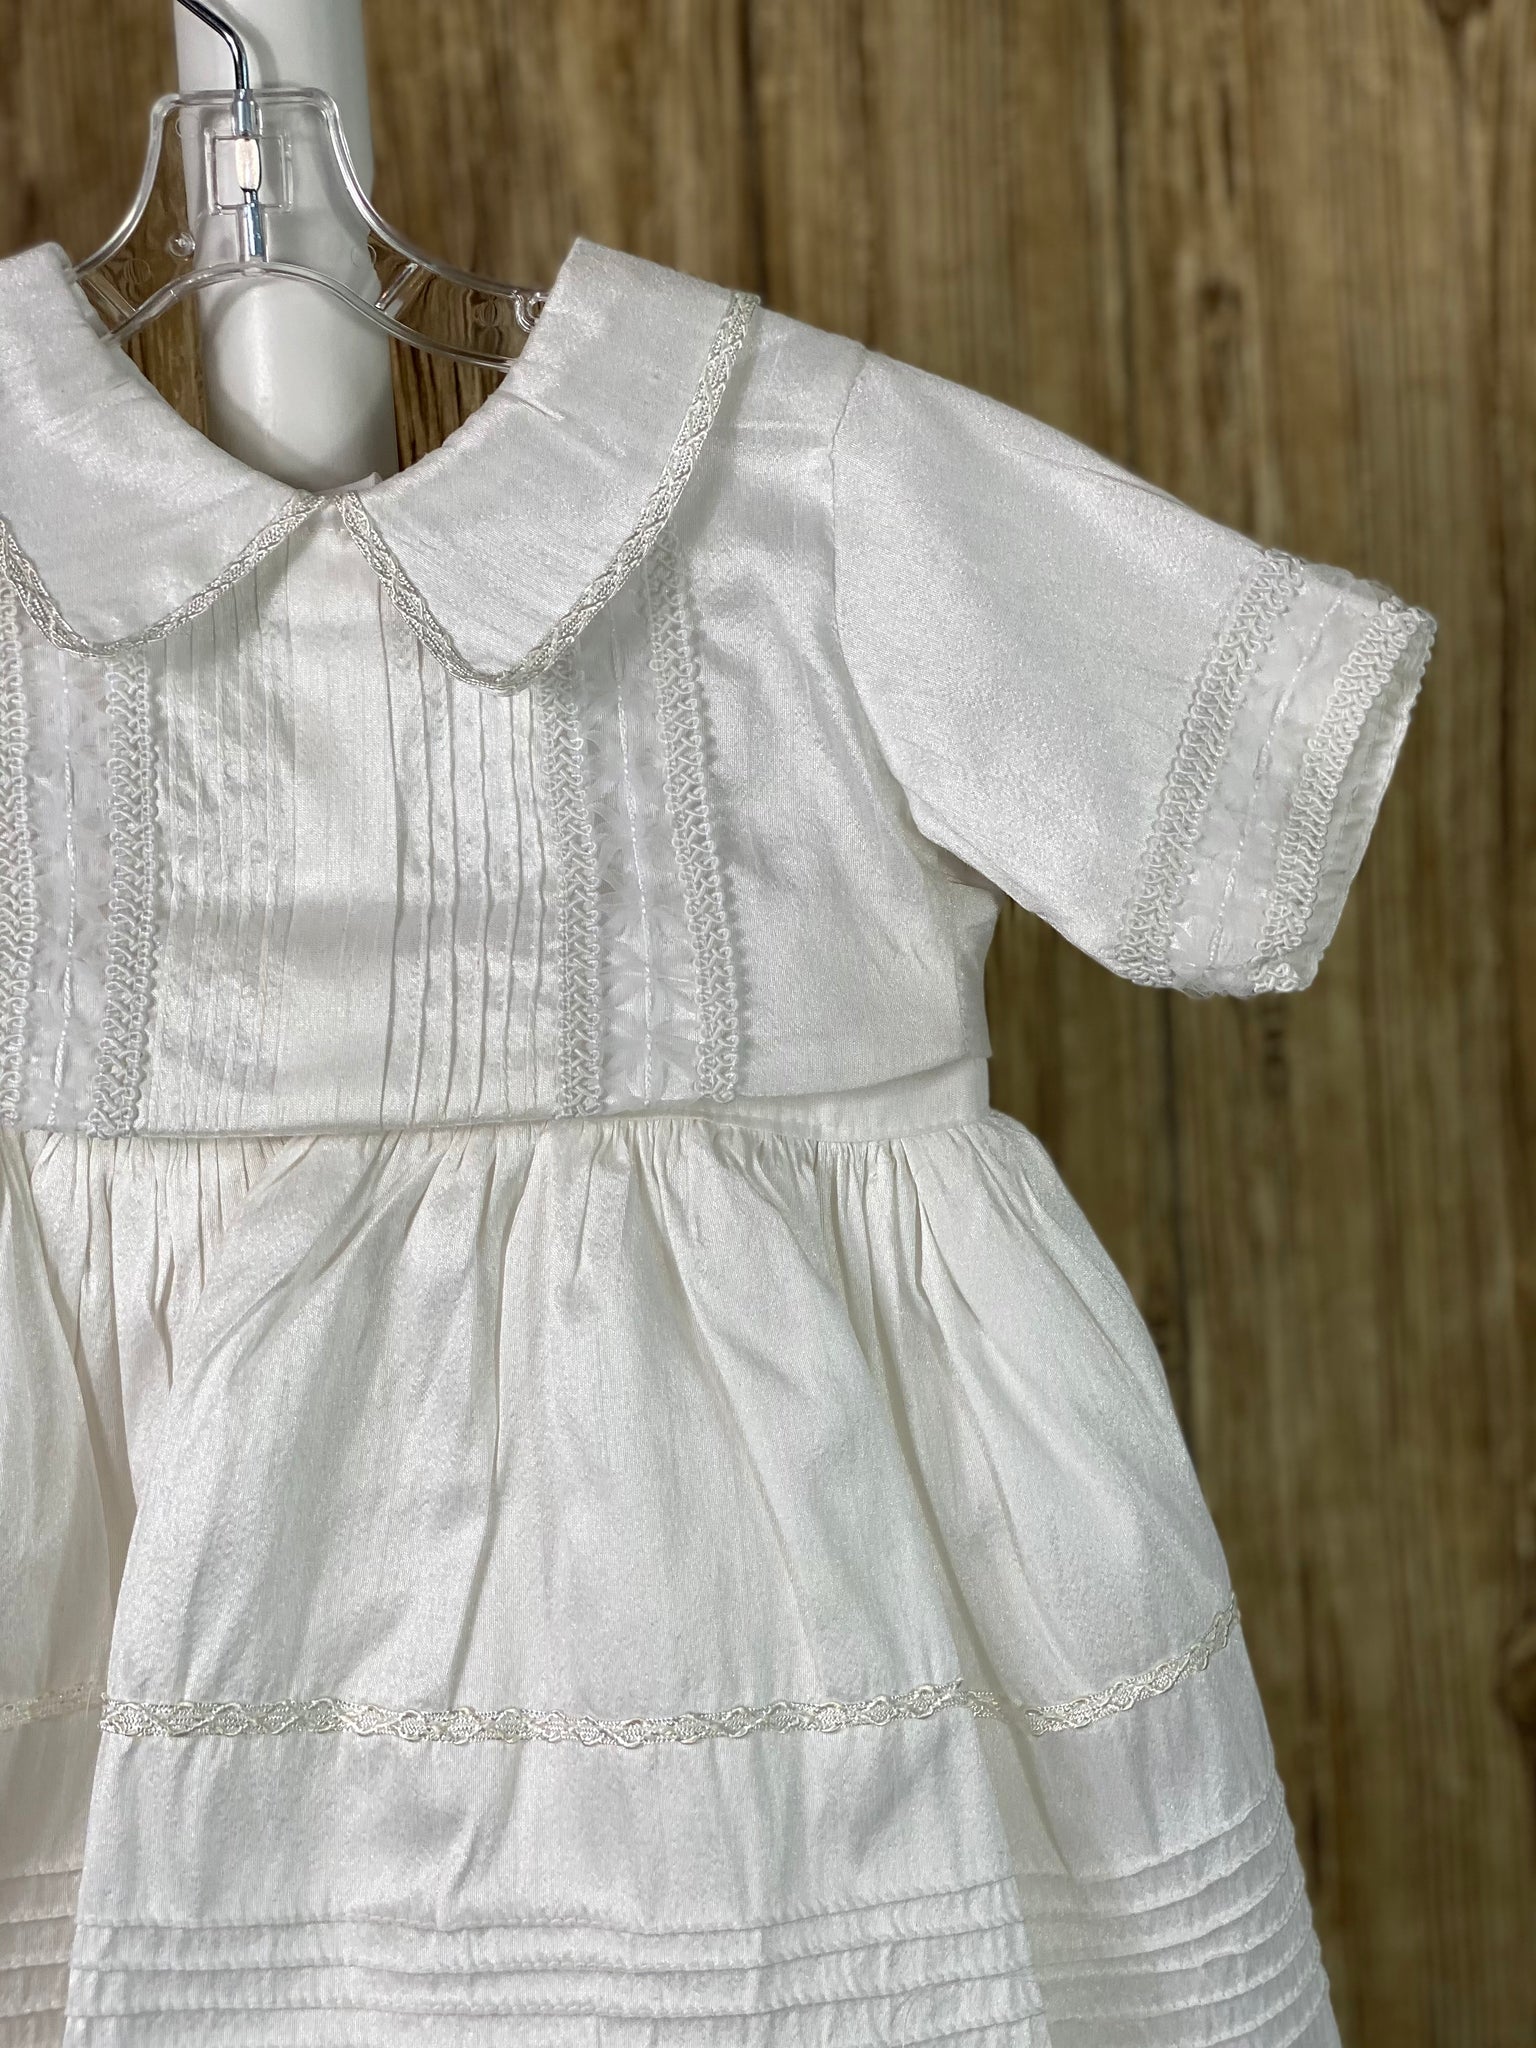 White, size 24M 2-piece set including romper and detachable over skirt Buttoning on cuffs Elastic banding on back of pants Collared with long sleeves Buttoning on back of romper and inside seam of legs Pinstriping layered on skirt, and on bodice of romper Mesh bowed trim layered on skirt, sleeve cuffs, and romper bodice Intricate swirled trim around mesh bowed trim